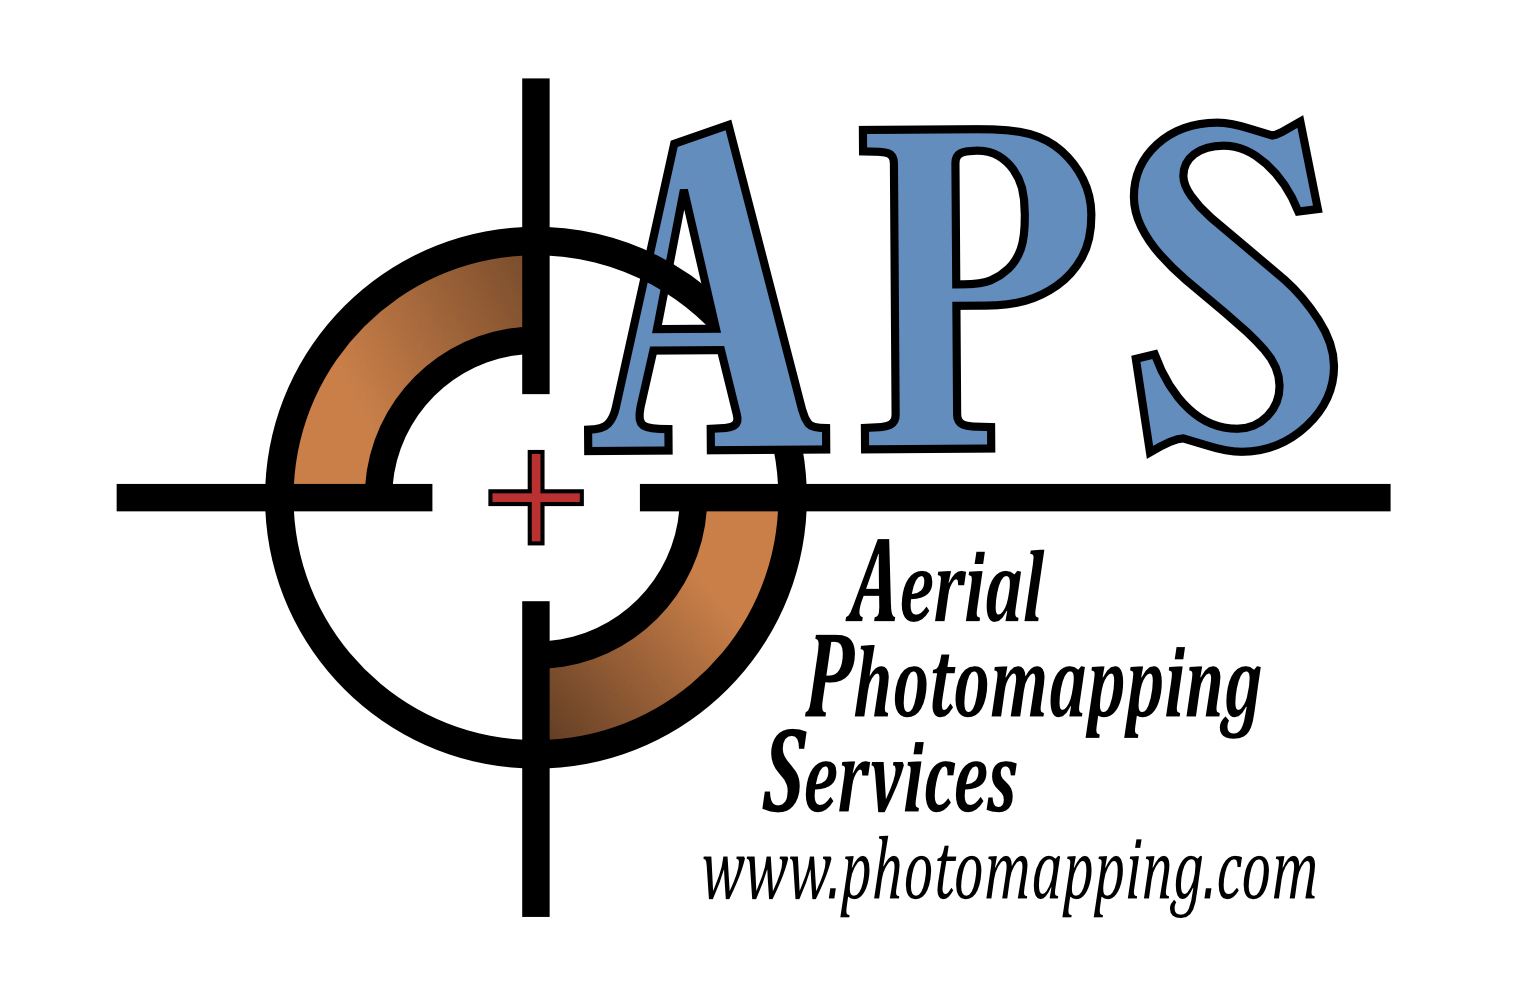 Aerial Photomapping Services